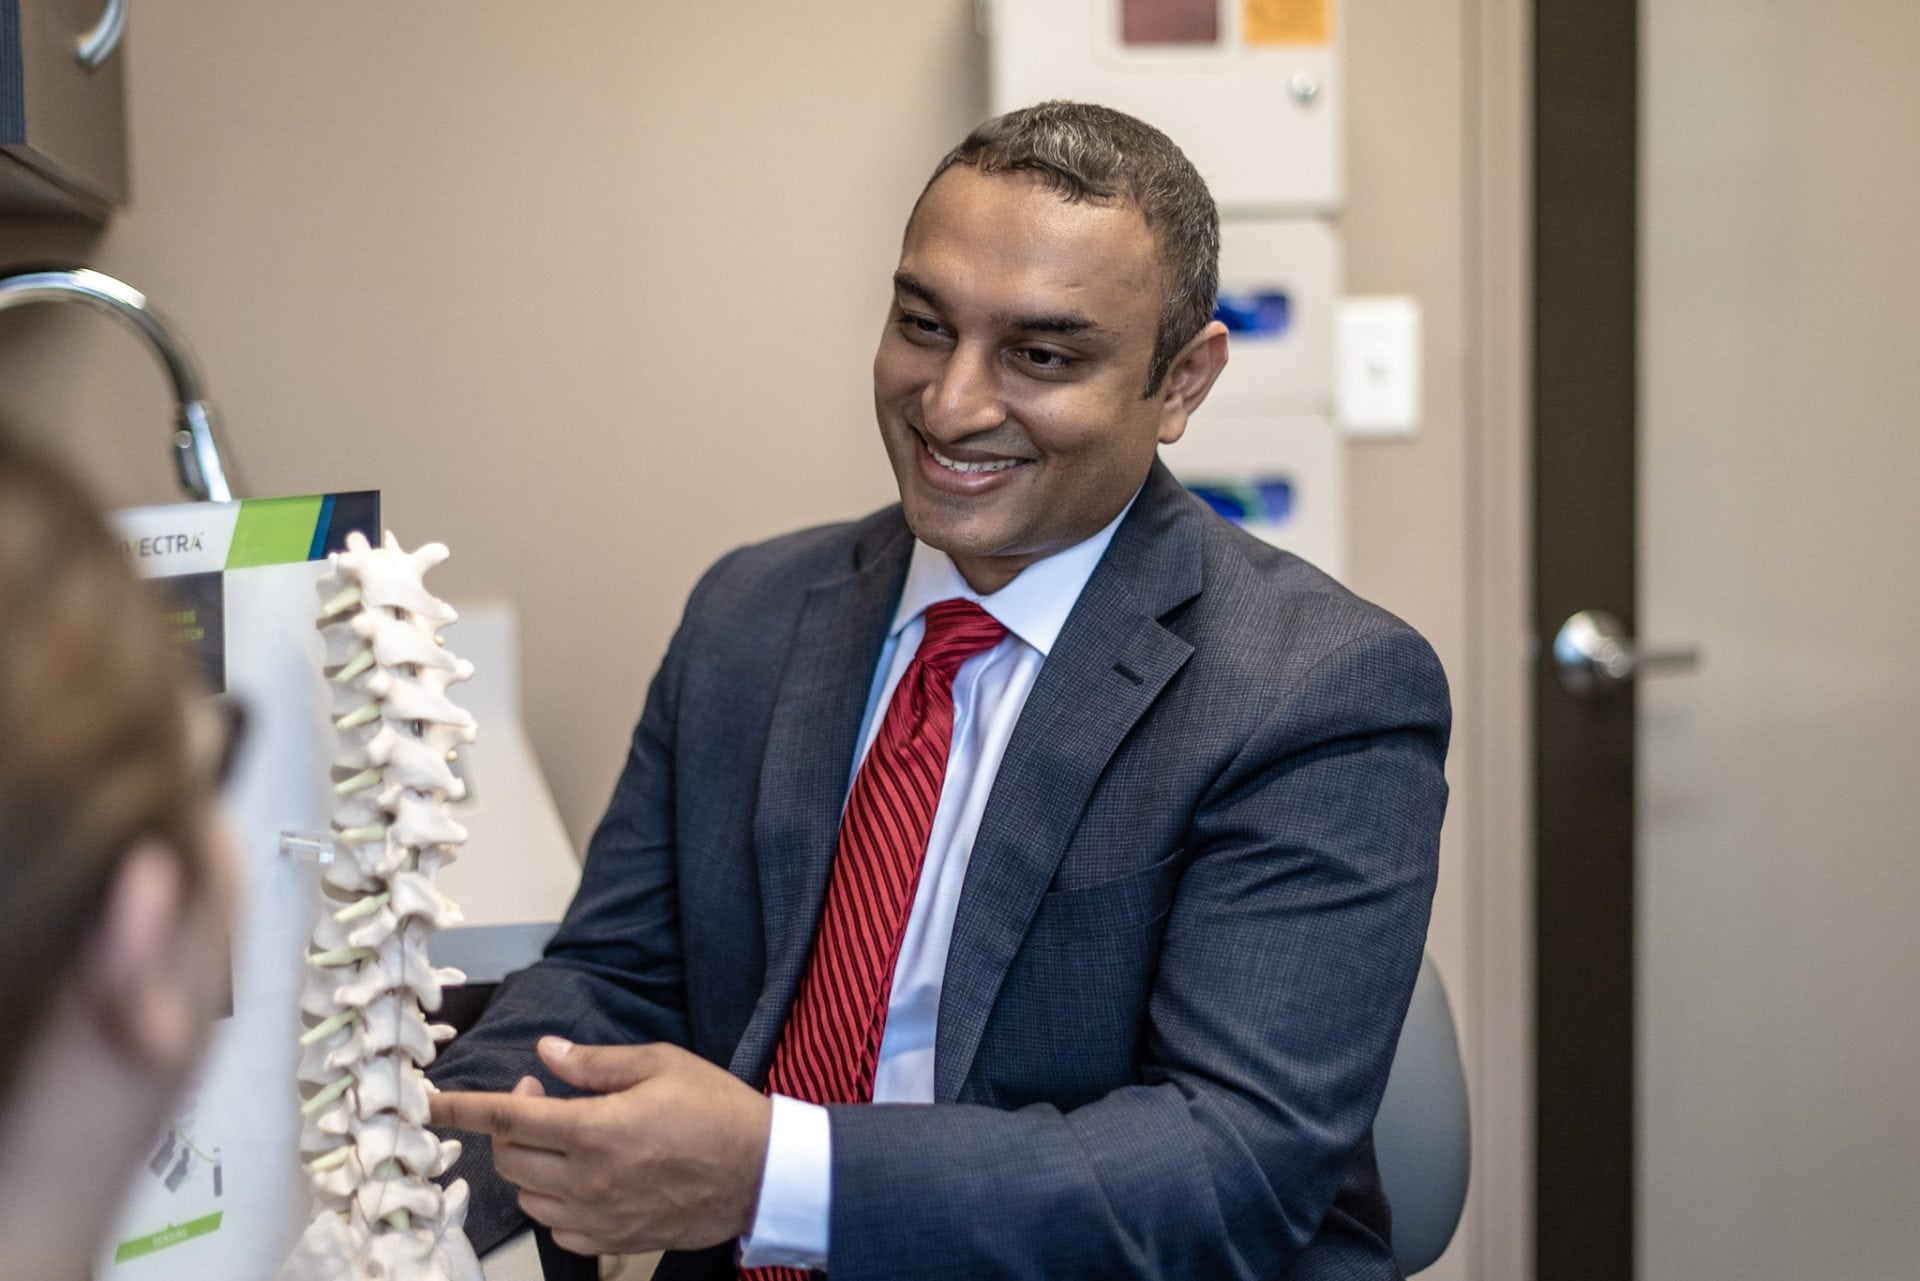 A man in a suit holding a spine